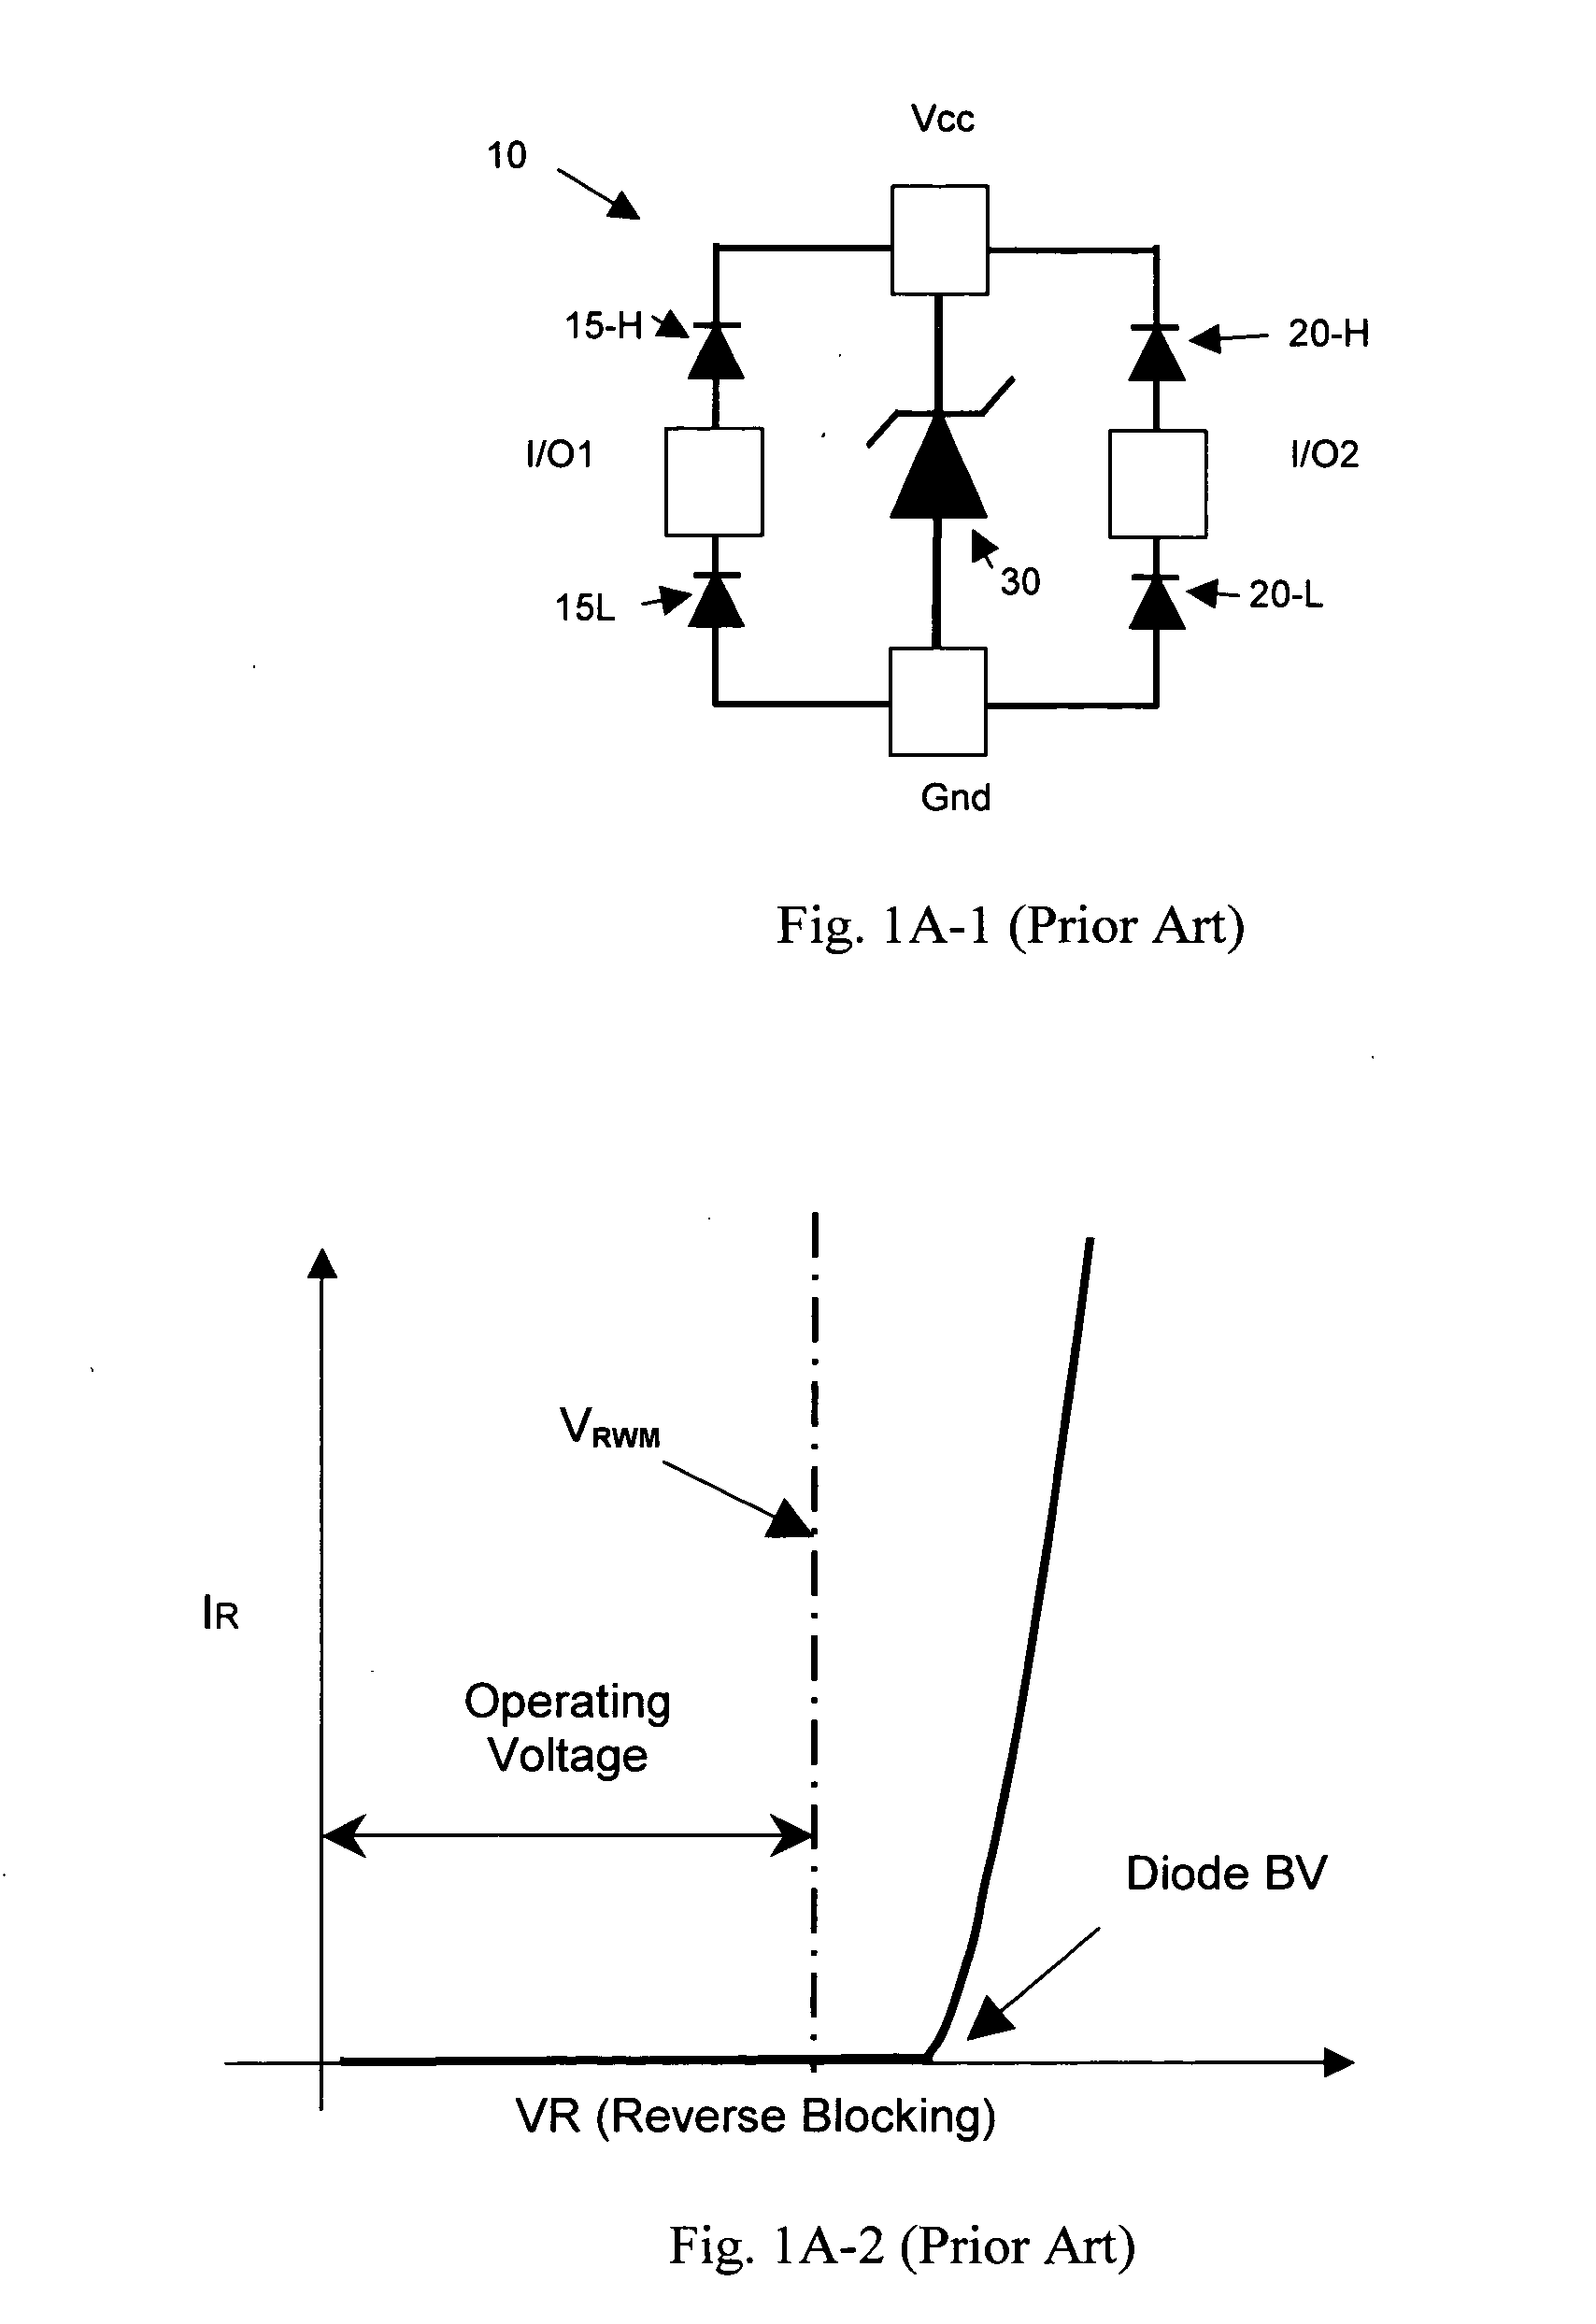 Circuit configuration and manufacturing processes for vertical transient voltage suppressor (TVS) and EMI filter